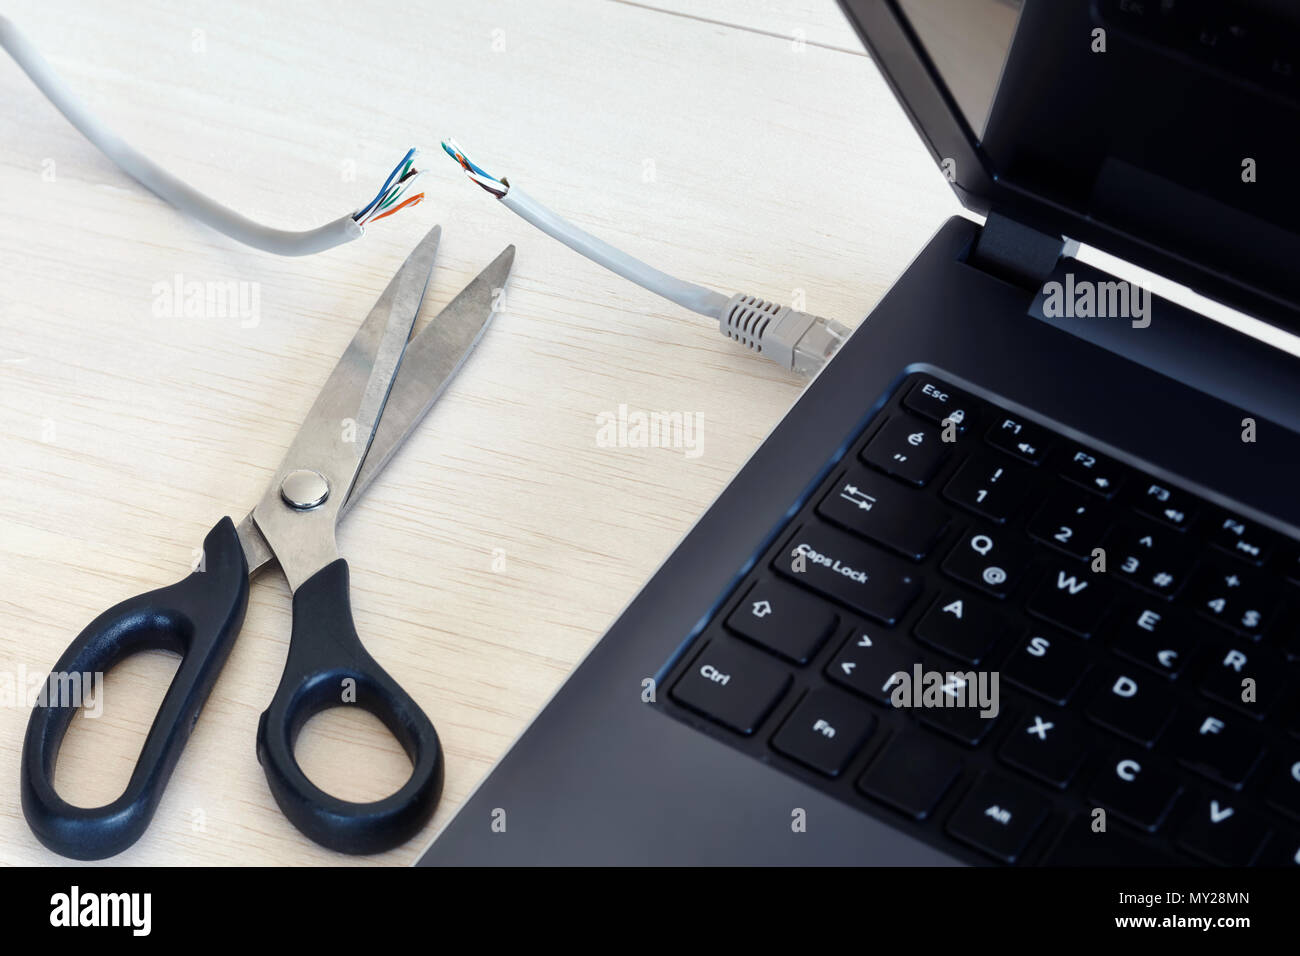 Internet cable connected to a laptop computer cut by a scissors. Concept of internet ban, cencorship and interruption. Stock Photo